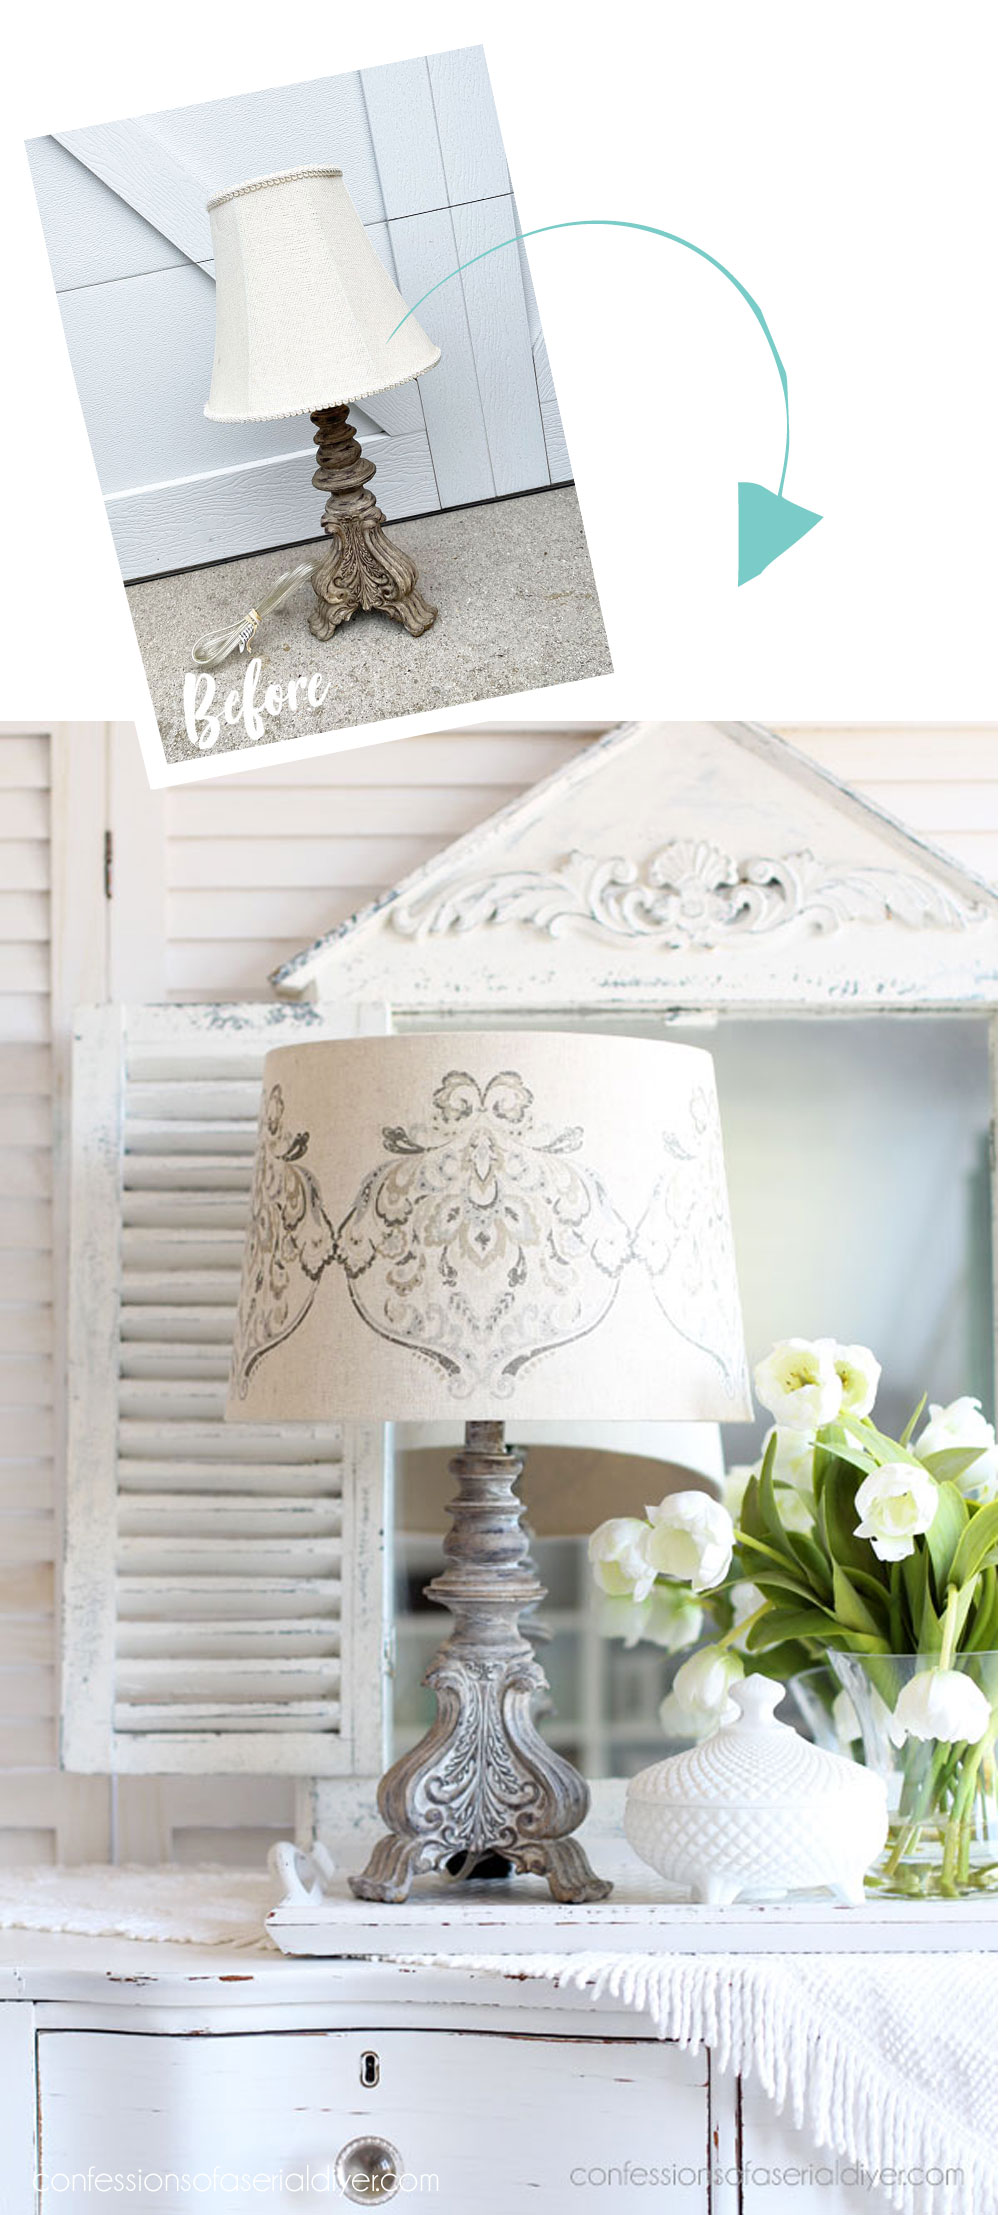 Add a transfer to a lamp shade